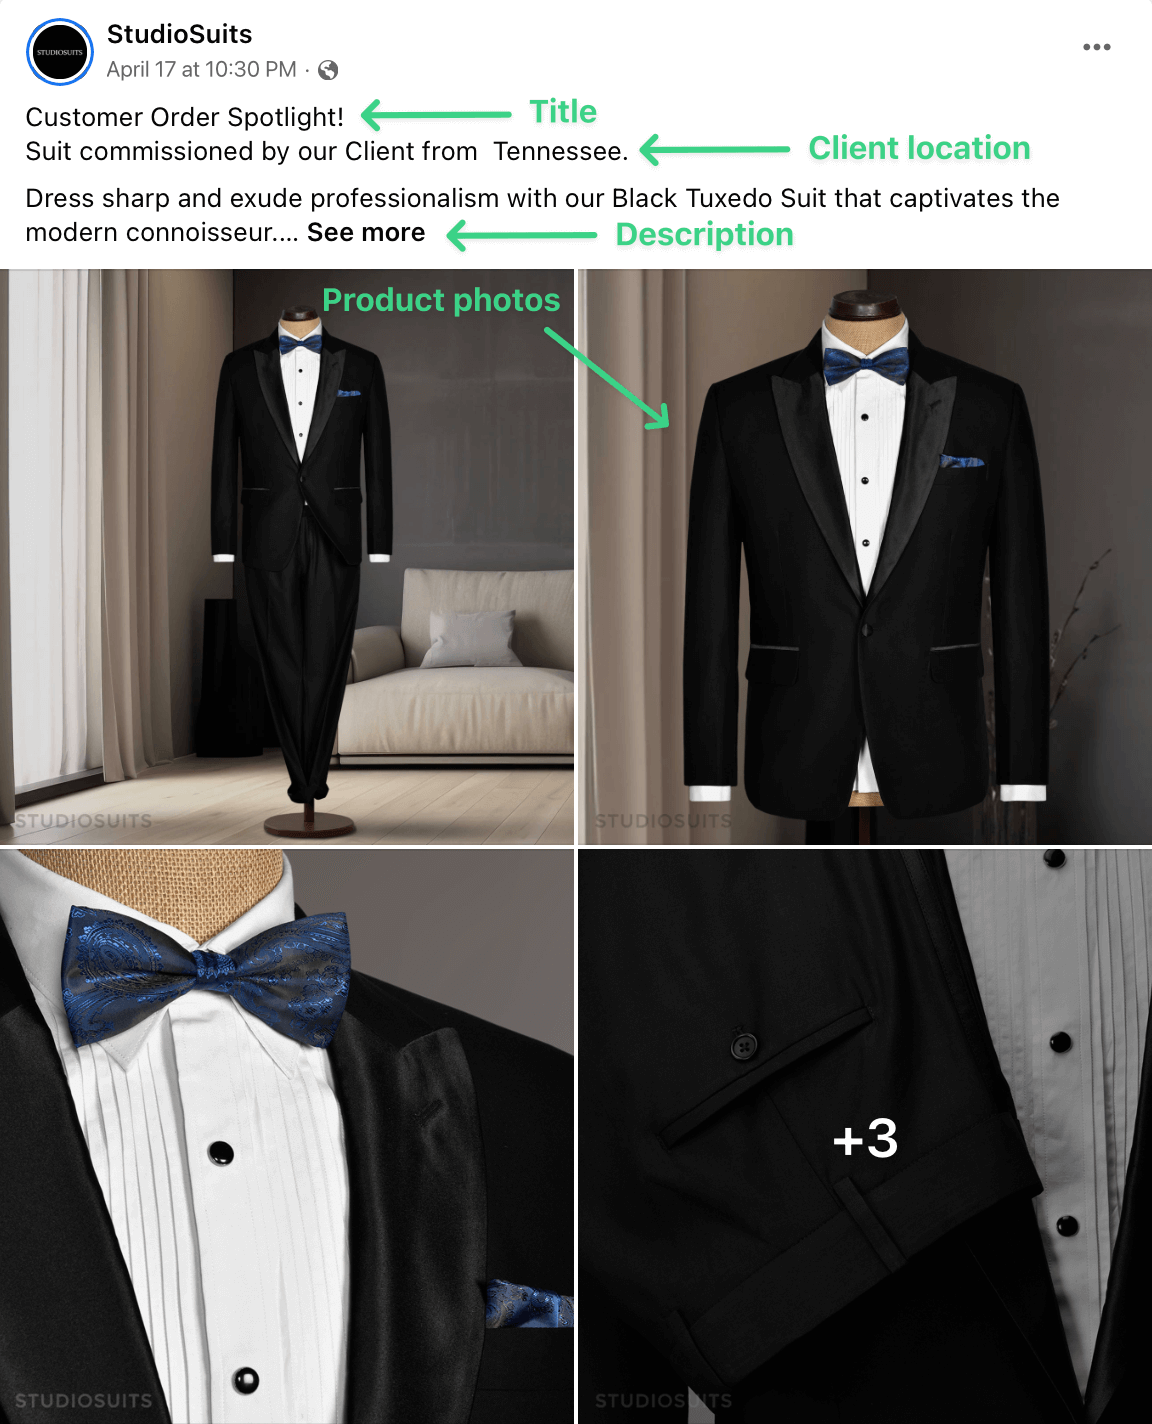 Explanatory screenshot of StudioSuits social media post highlighting style guide elements like product title, description, photos.